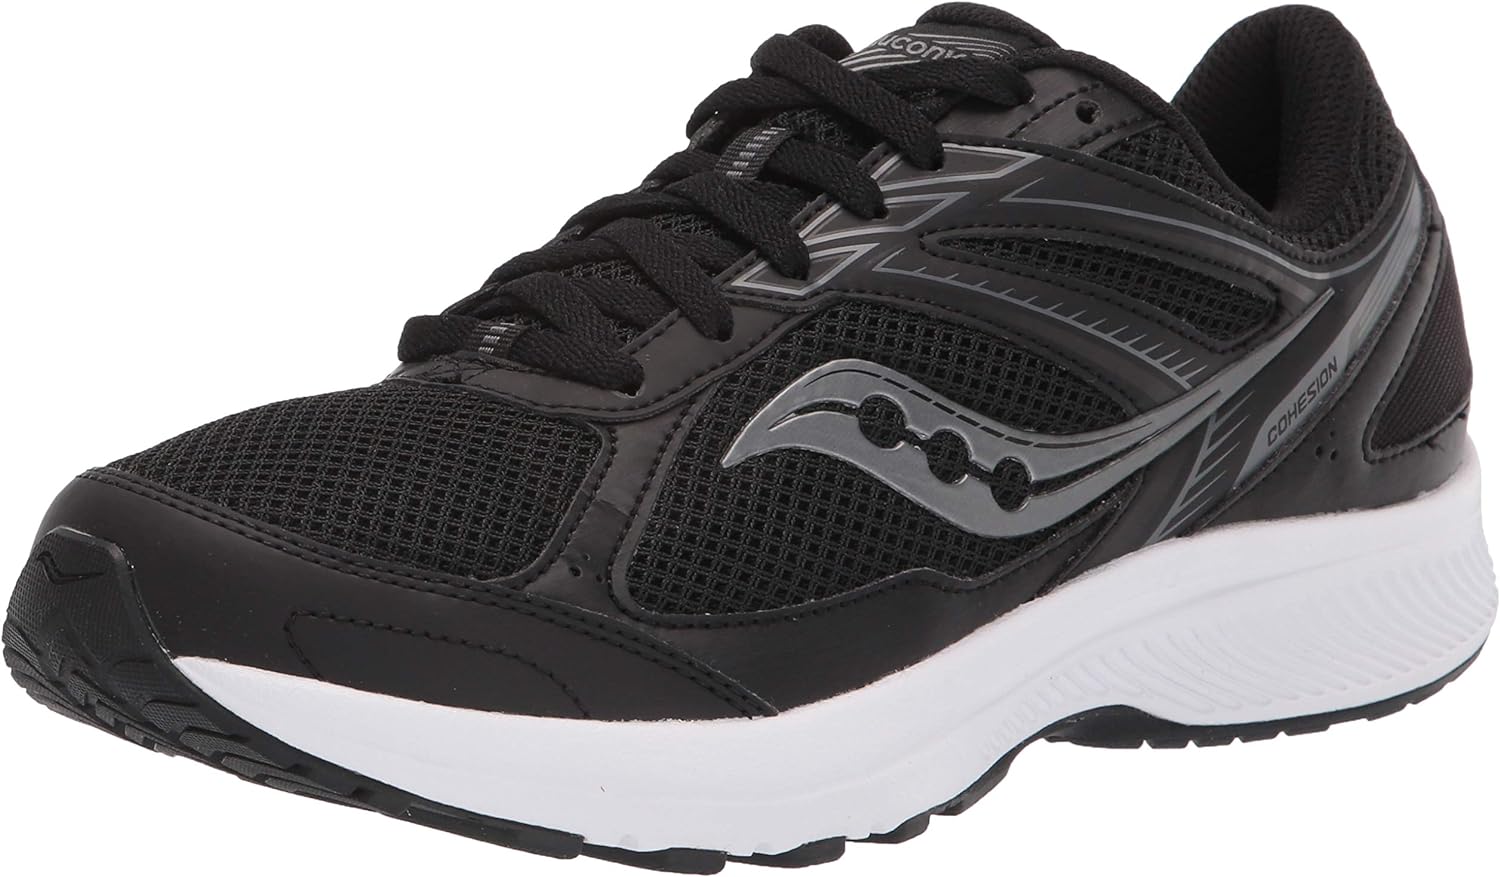 Saucony Mens Cohesion Tr14 Trail Running Shoe